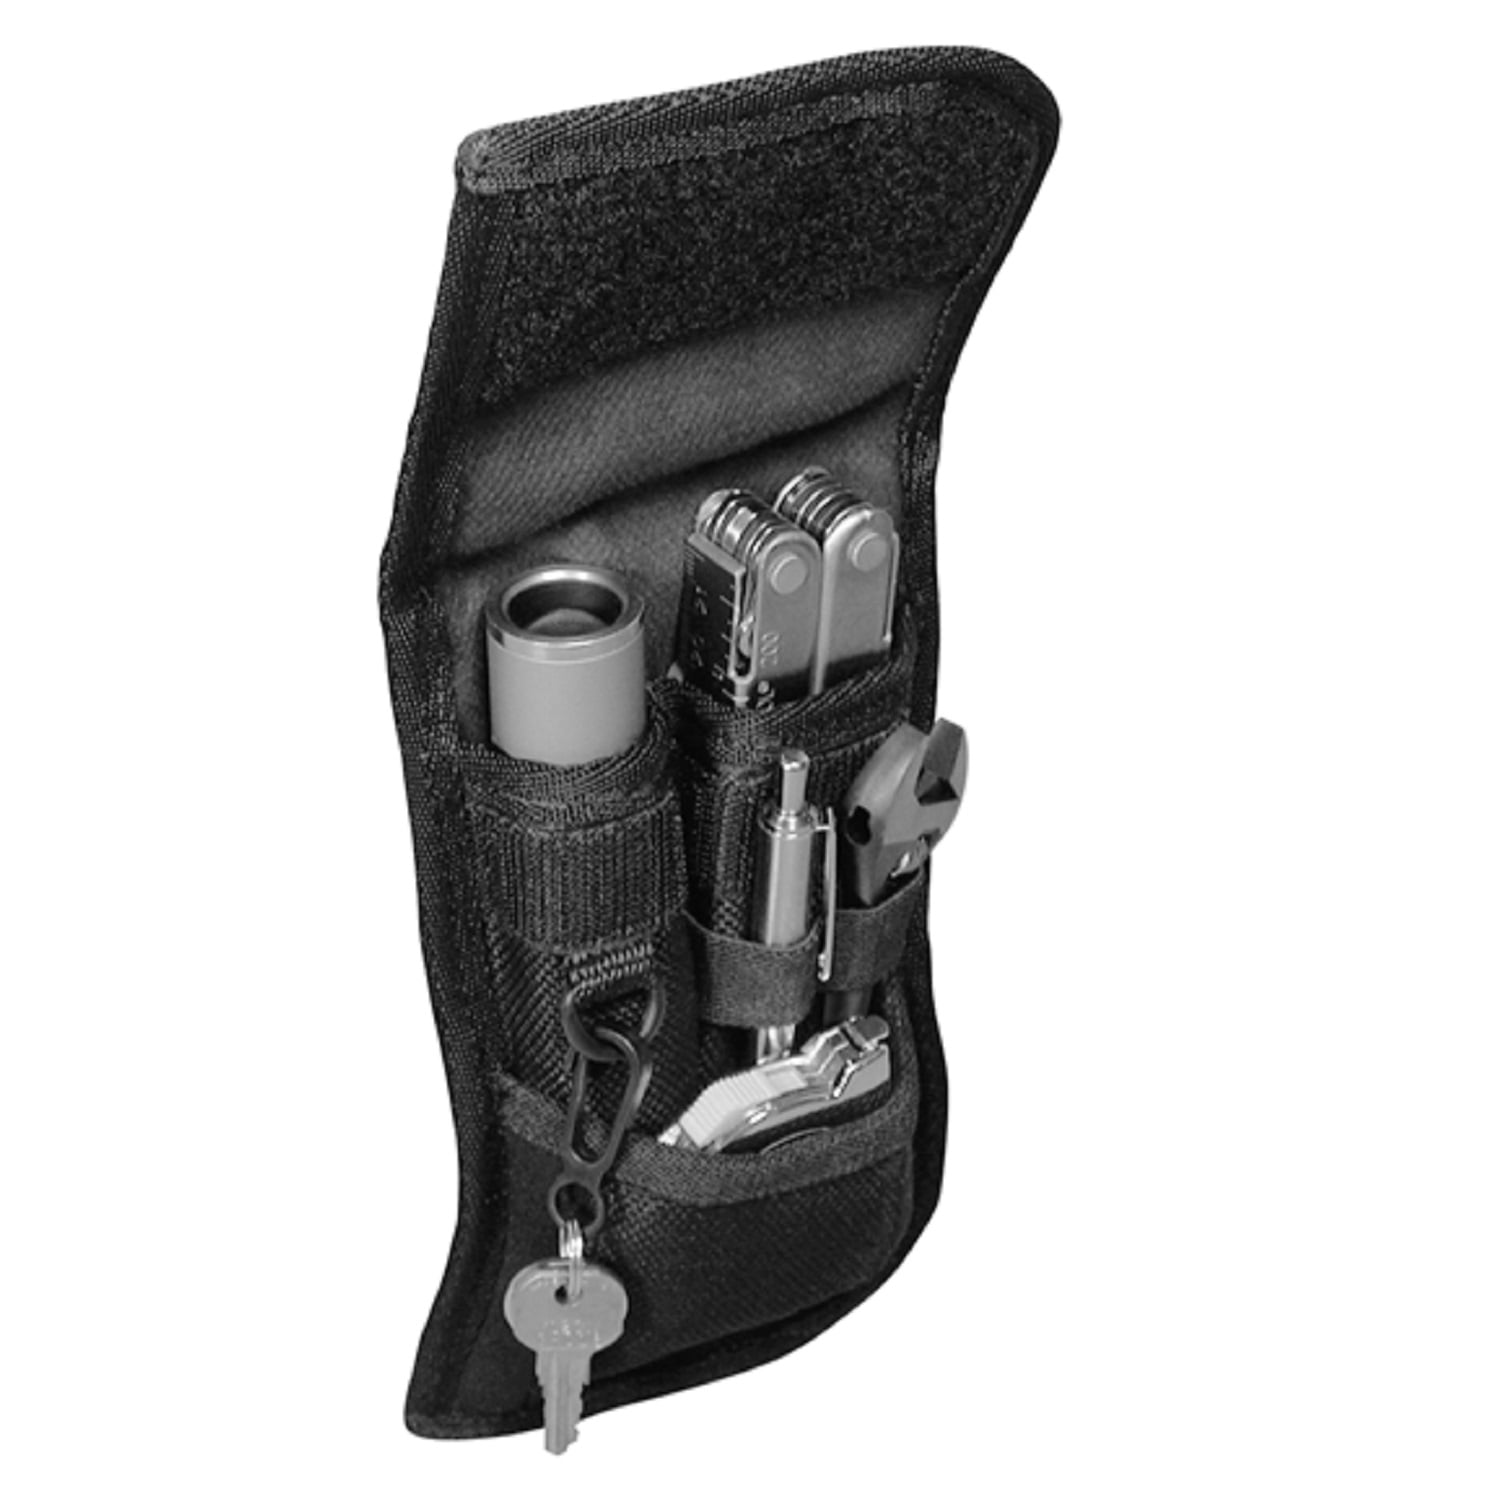 Nite Ize Clip Pock-Its XL Utility Holster Rugged Multi-Tool Pouch 3-Pack 